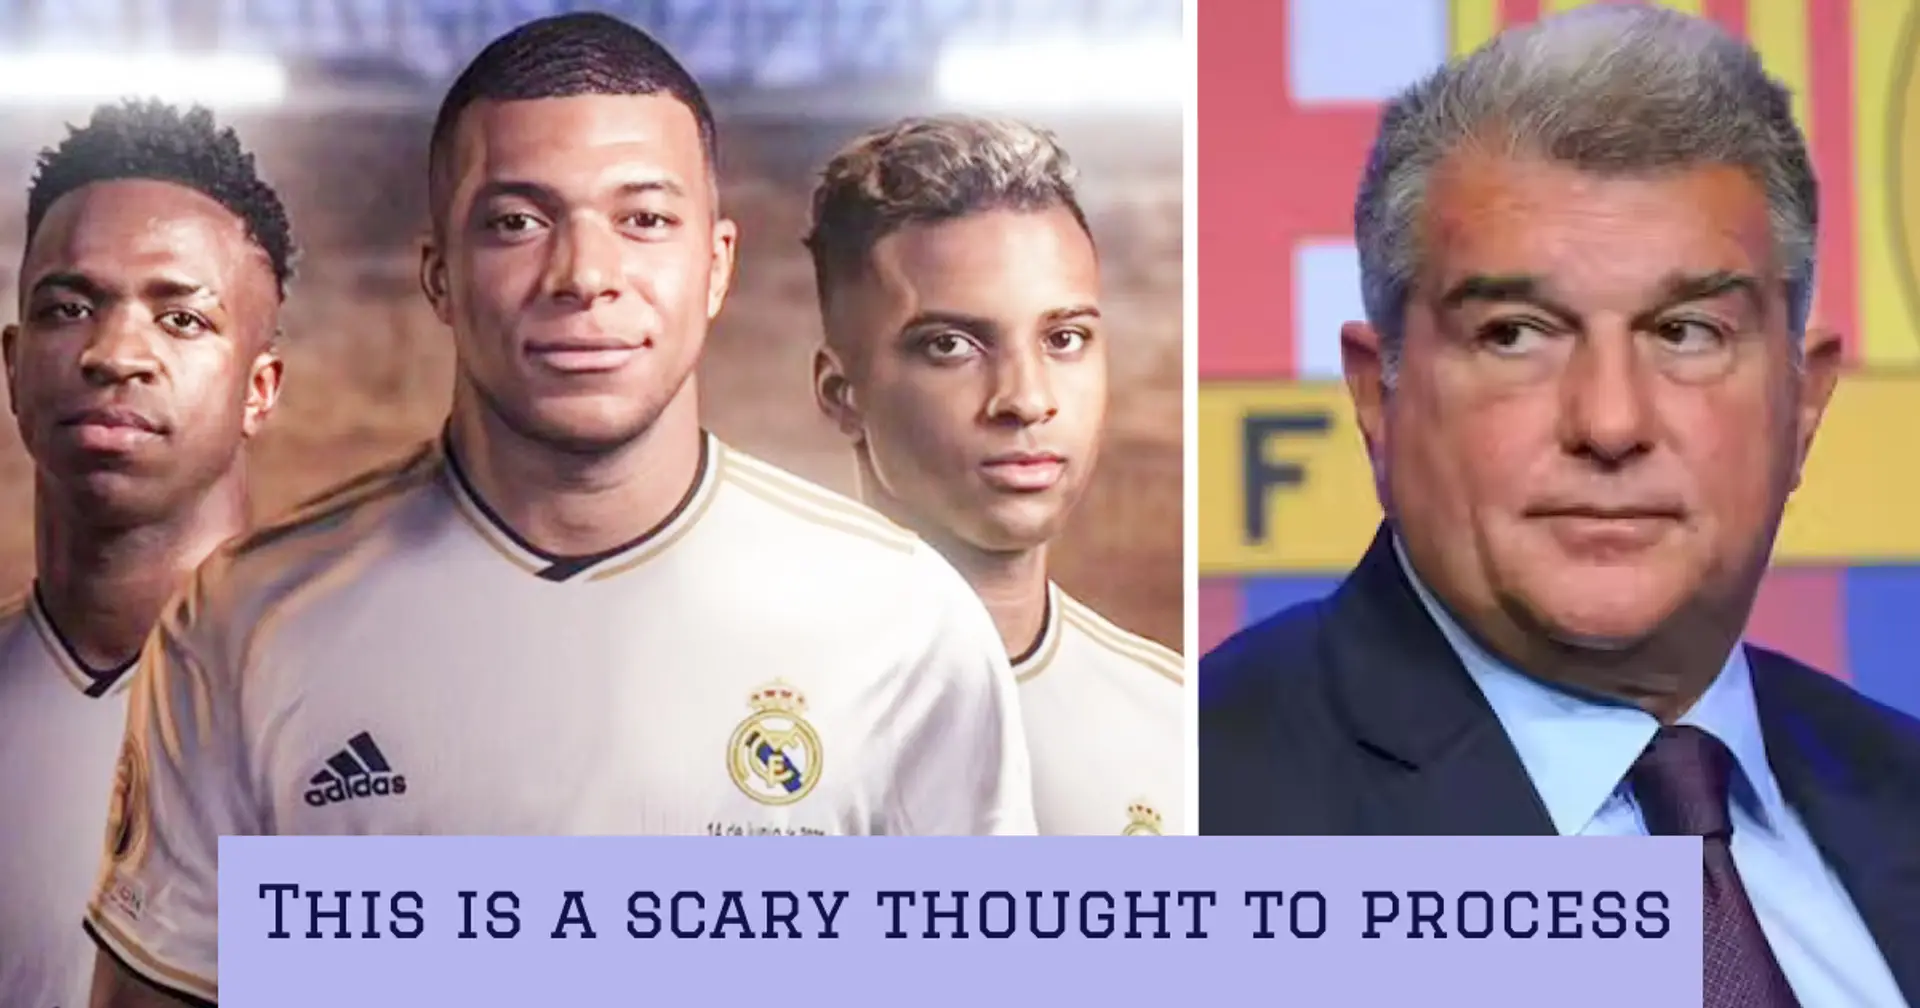 'While we sign Carrasco': Barca fans react as Mbappe seems to be joining Real Madrid this summer